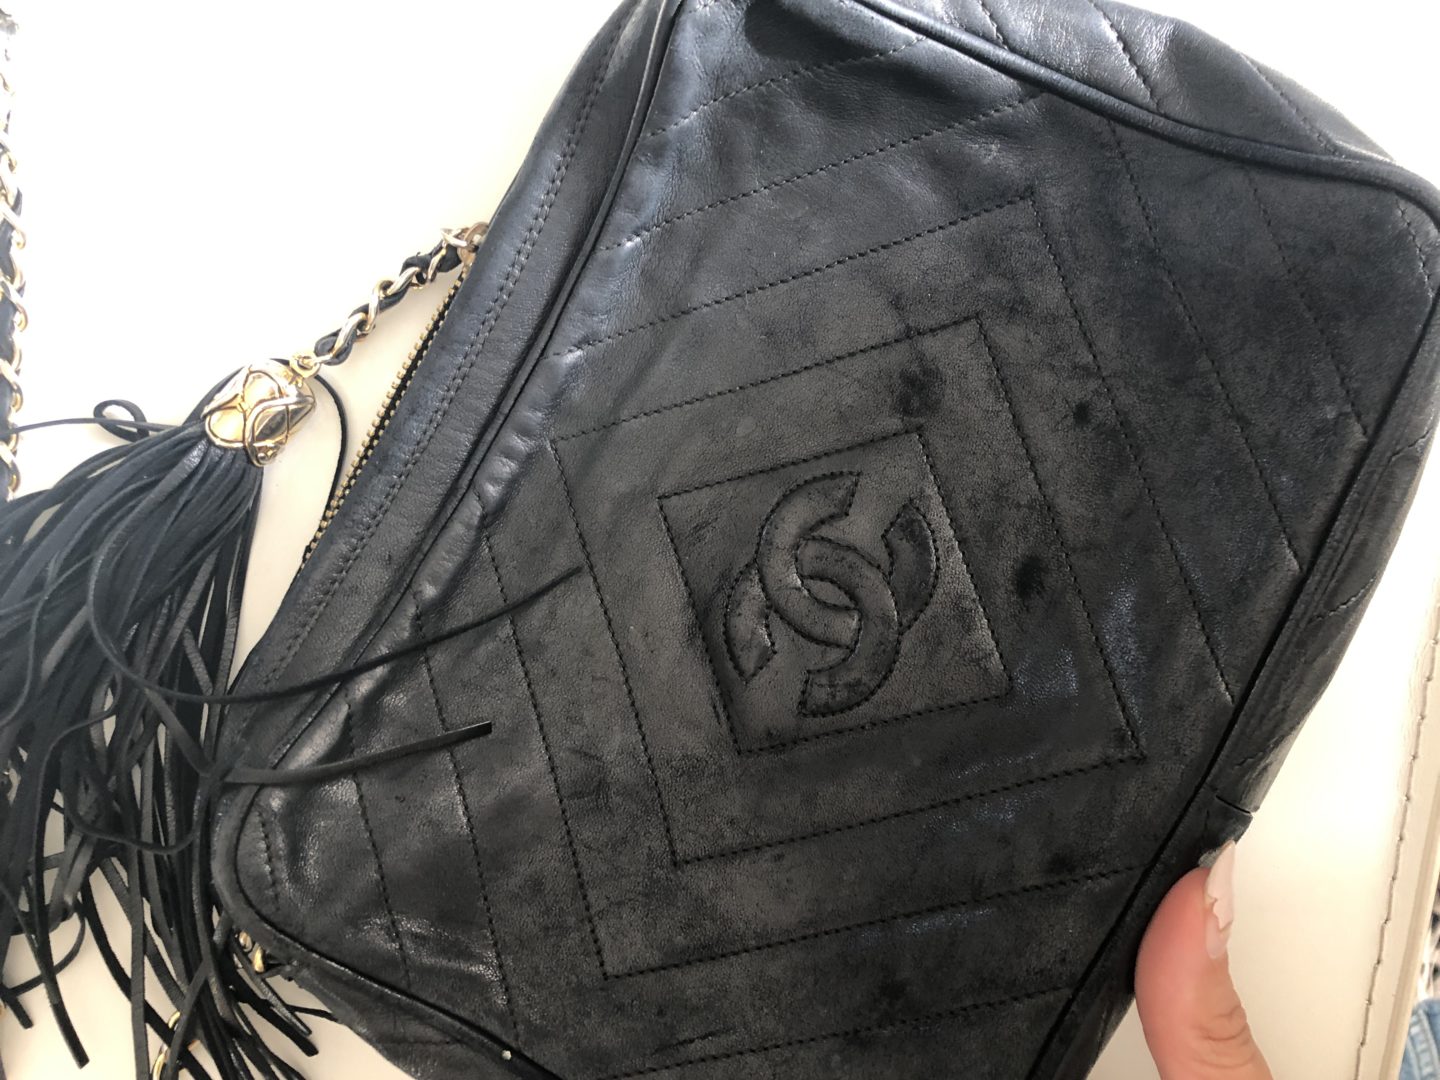 will chanel store authenticate